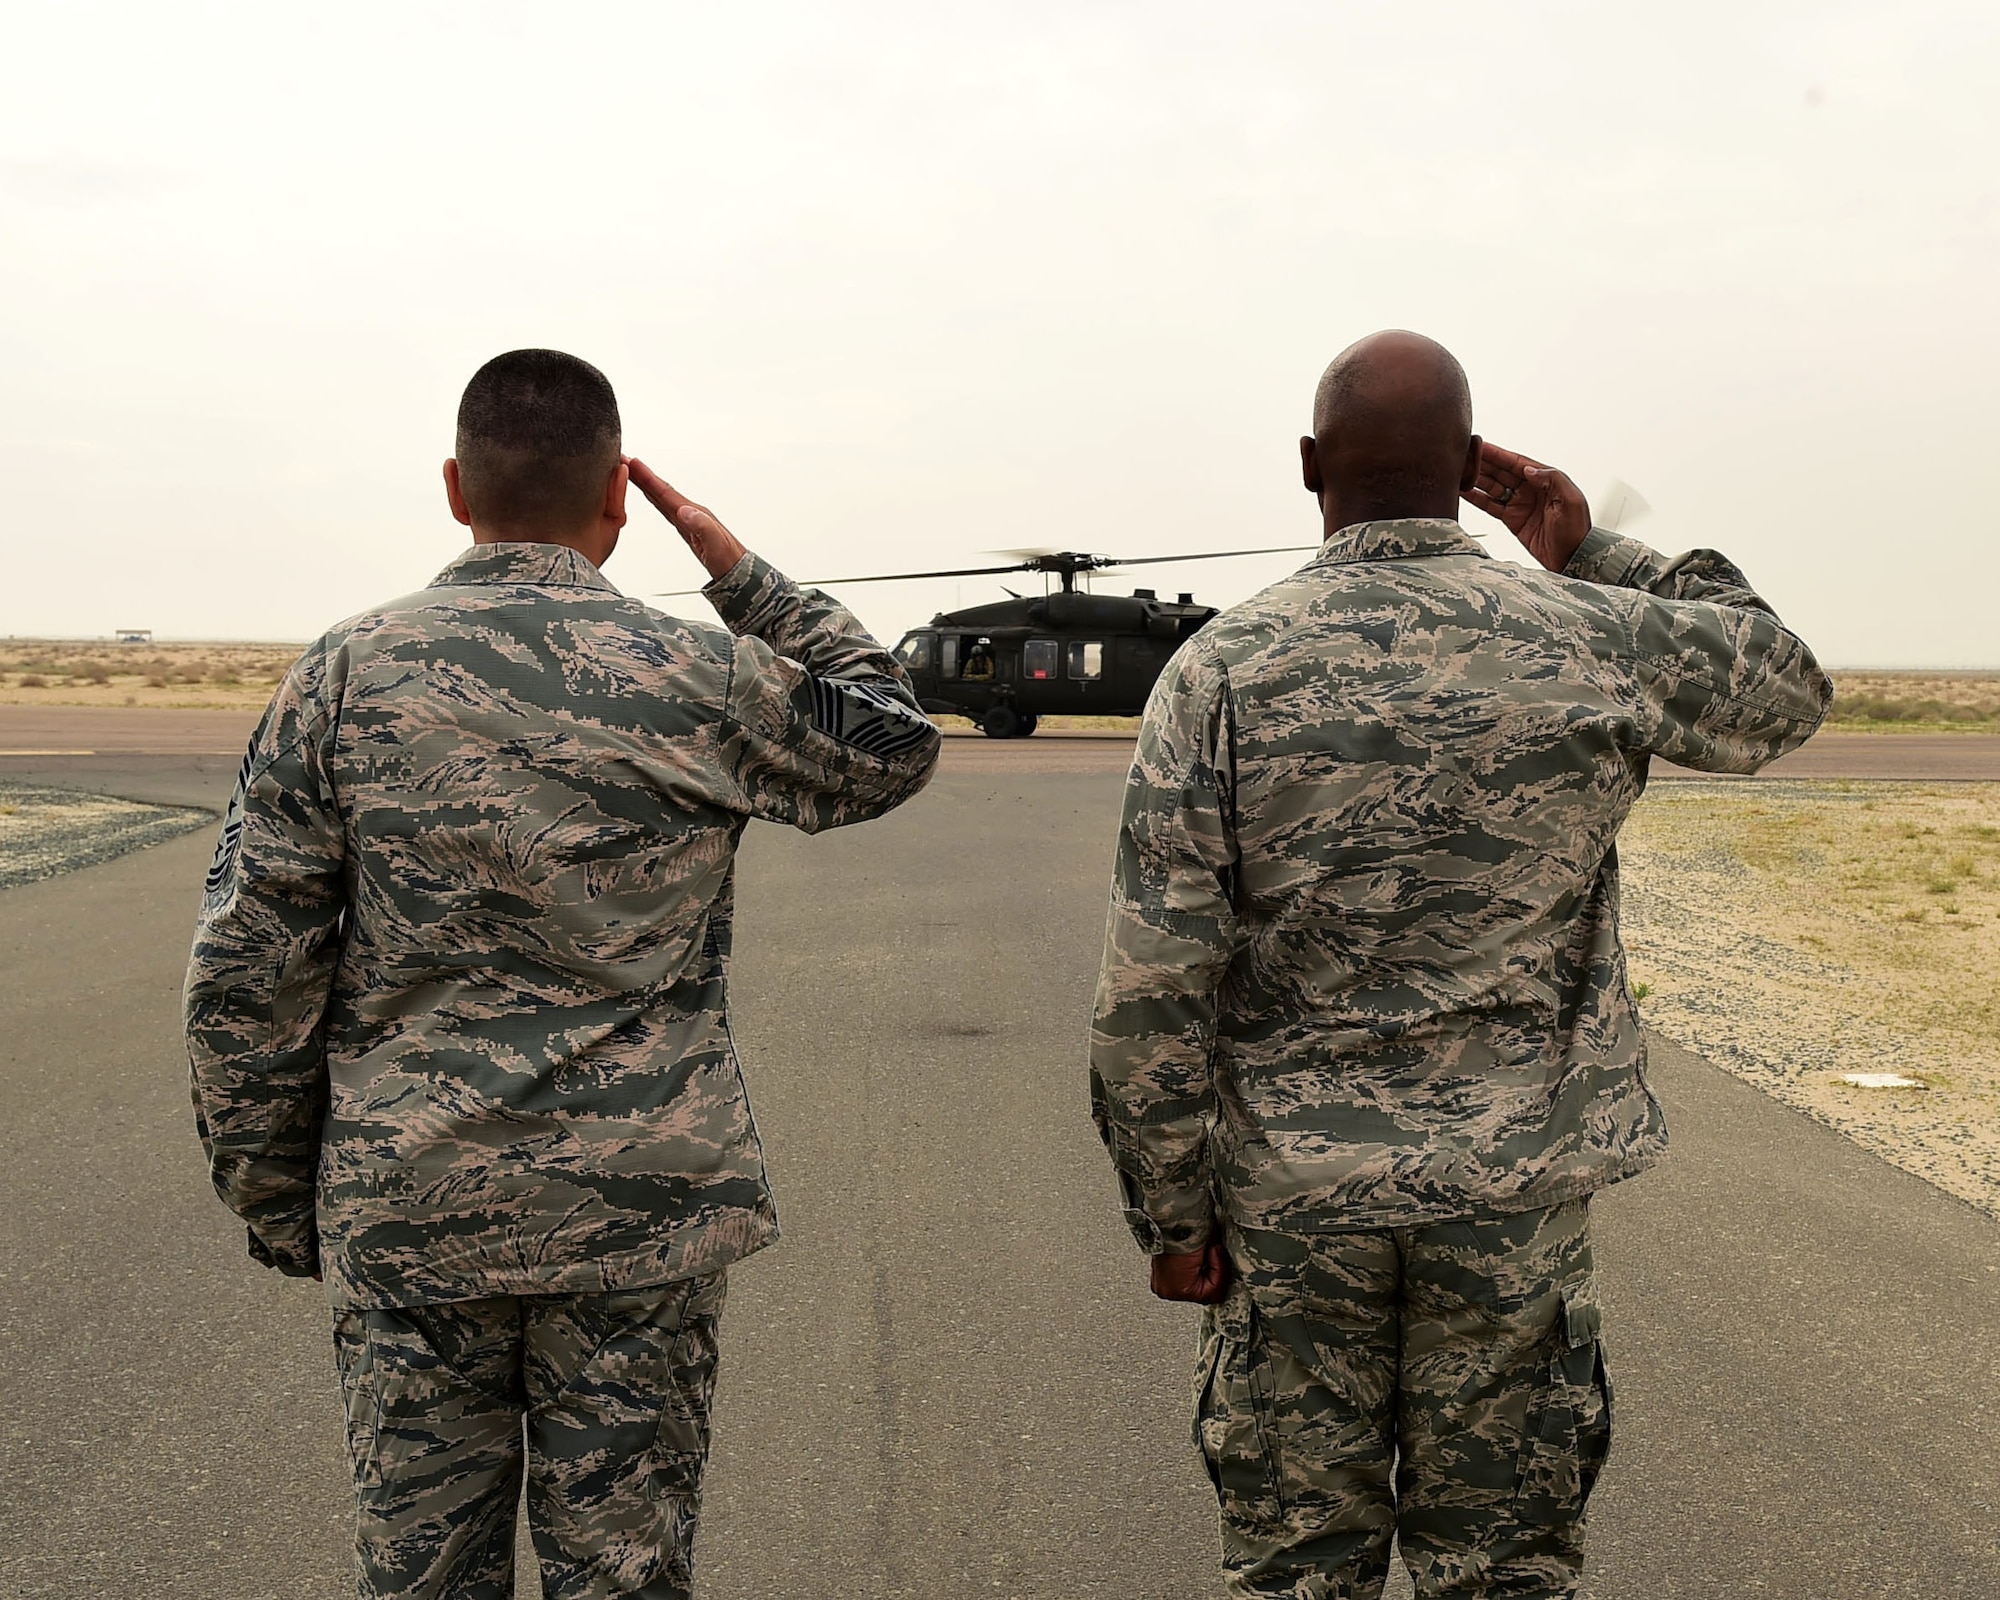 Col. Clarence Lukes Jr., 386th Air Expeditionary Wing commander, and Chief Master Sgt. Richard Vargas, 386th AEW Command Chief Master Sergeant, salute as Central Command commander U.S. Army Gen. Lloyd J. Austin III arrives on the flightline at an undisclosed location in Southwest Asia, Nov. 24, 2015. Austin toured various 386th AEW work centers and interacted with service members expressing gratitude and thanks for their service and support of Operation INHERENT RESOLVE. (U.S. Air Force photo by Staff Sgt. Jerilyn Quintanilla) 